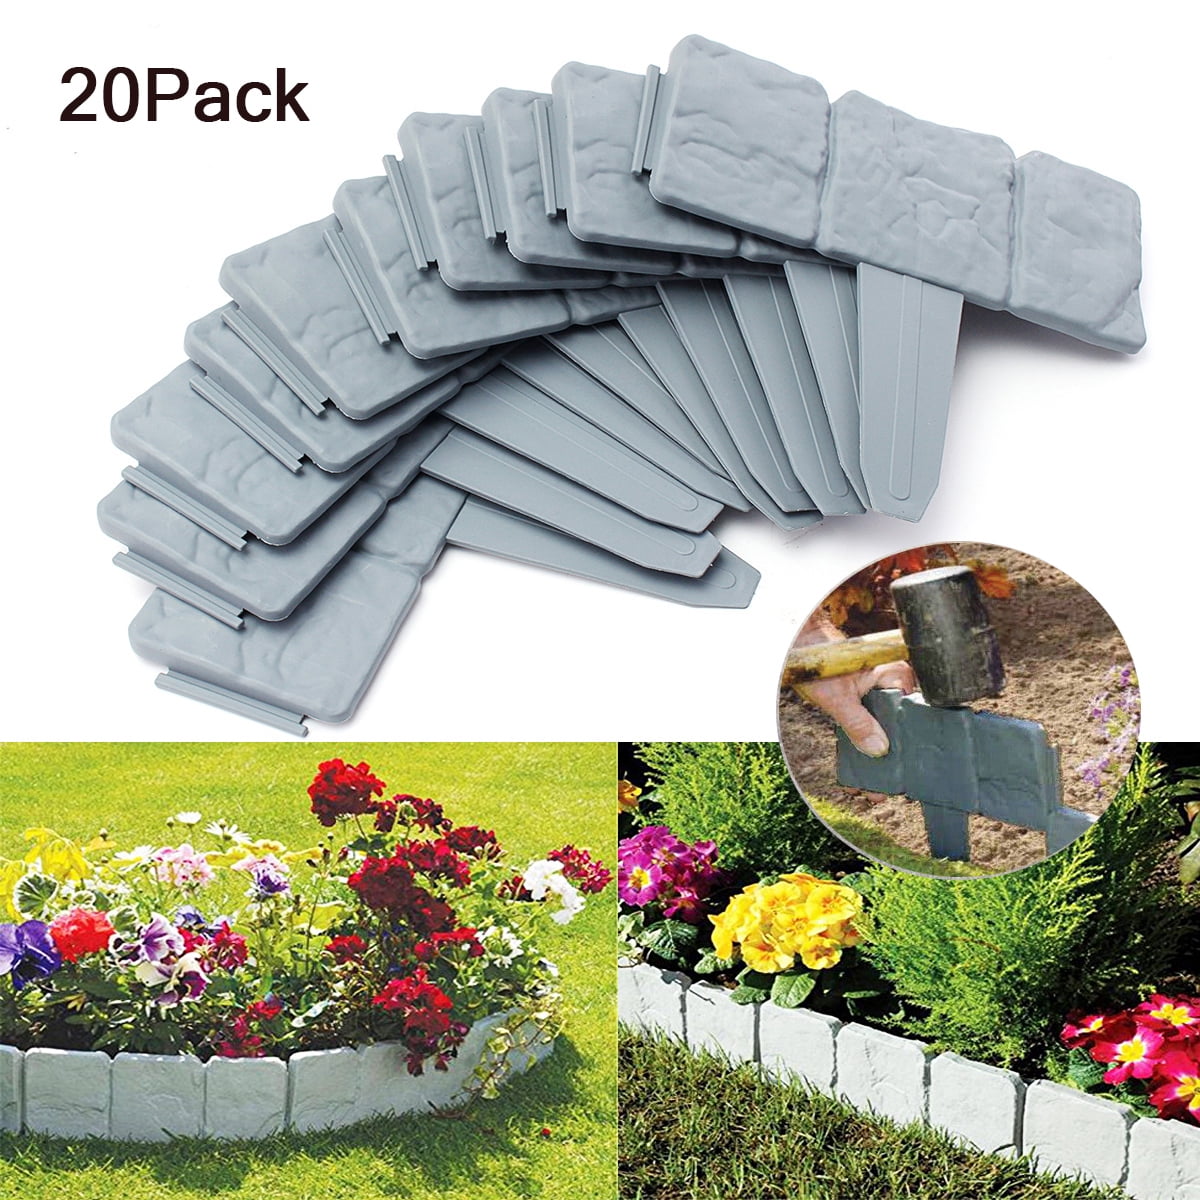 20Pack Home Garden Border Edging Plastic Fence Lawn Yard Cobbled Stone Effect US 